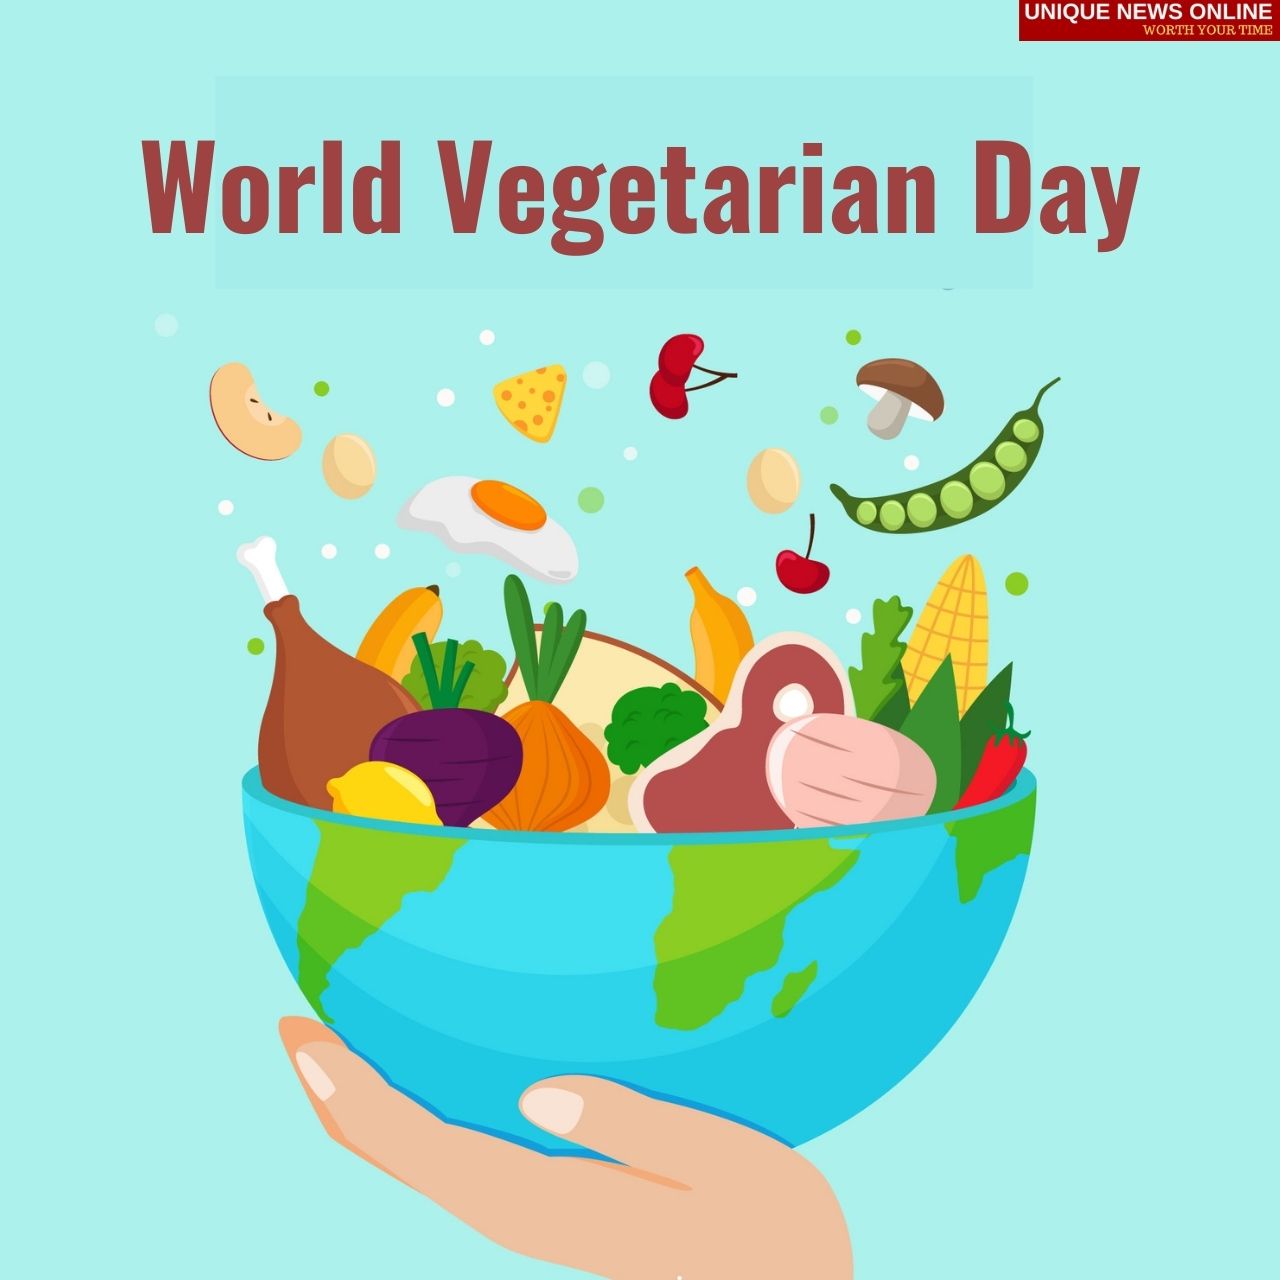 World Vegetarian Day 2021 Quotes, HD Images, Wishes, Meme, Messages, and Gif